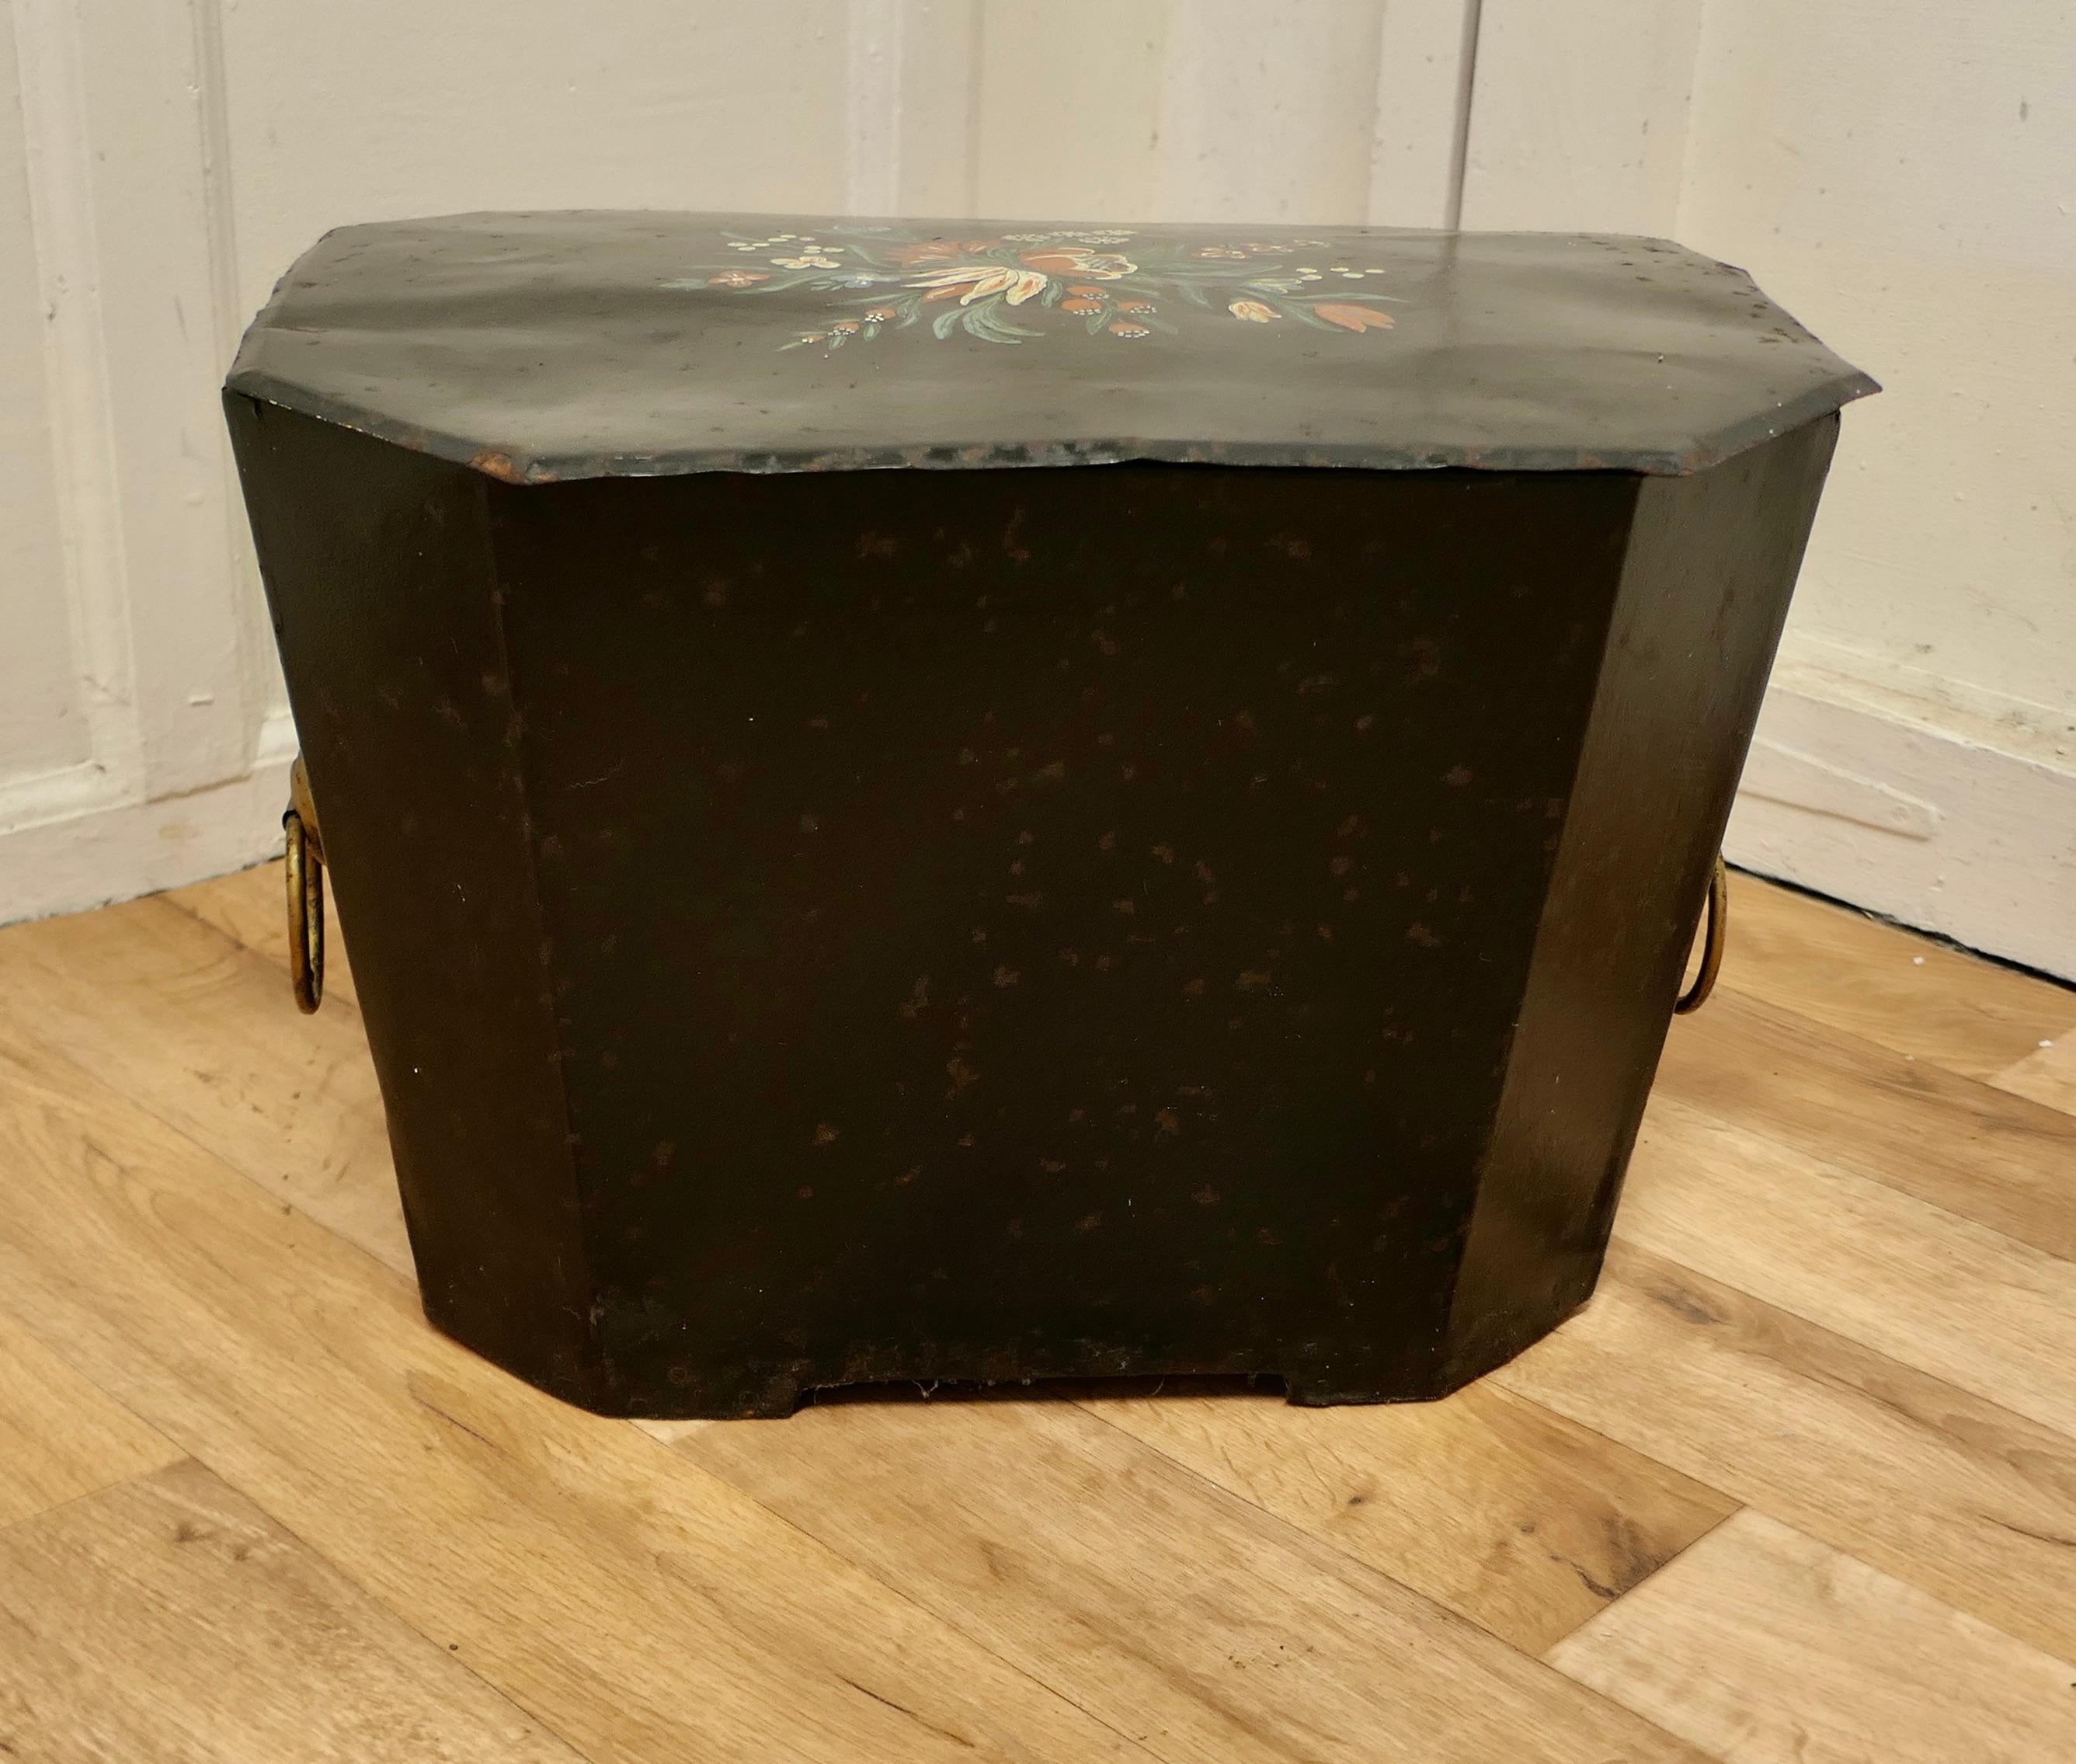 19th C folk art barge wear, Toleware log box

Delightfully decorated with flowers, this toleware box is rectangular with chamfered corners and decorated with Barge Wear Folk Art painting, it has solid wooden bottom and chunky ring handles